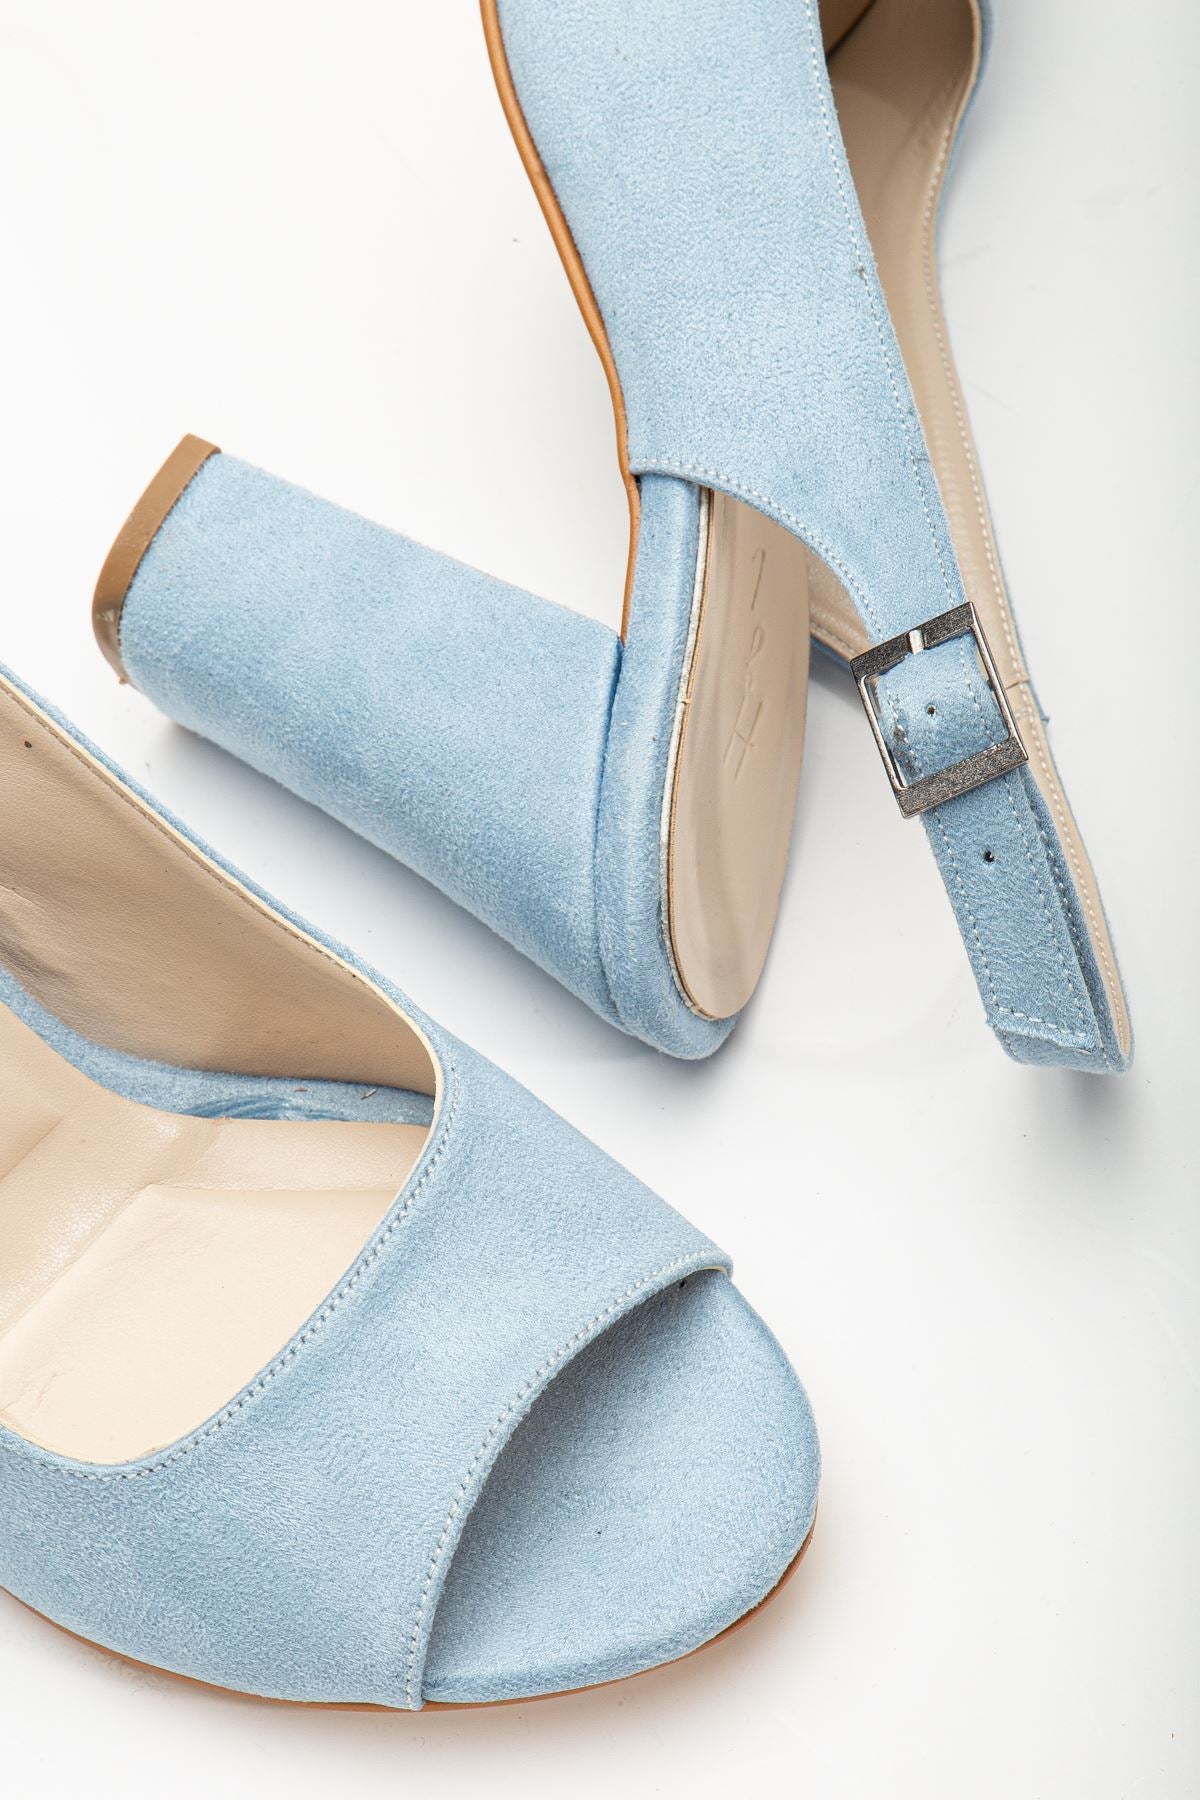 Meira Baby Blue Suede Detailed High Heeled Women's Shoes - STREETMODE™